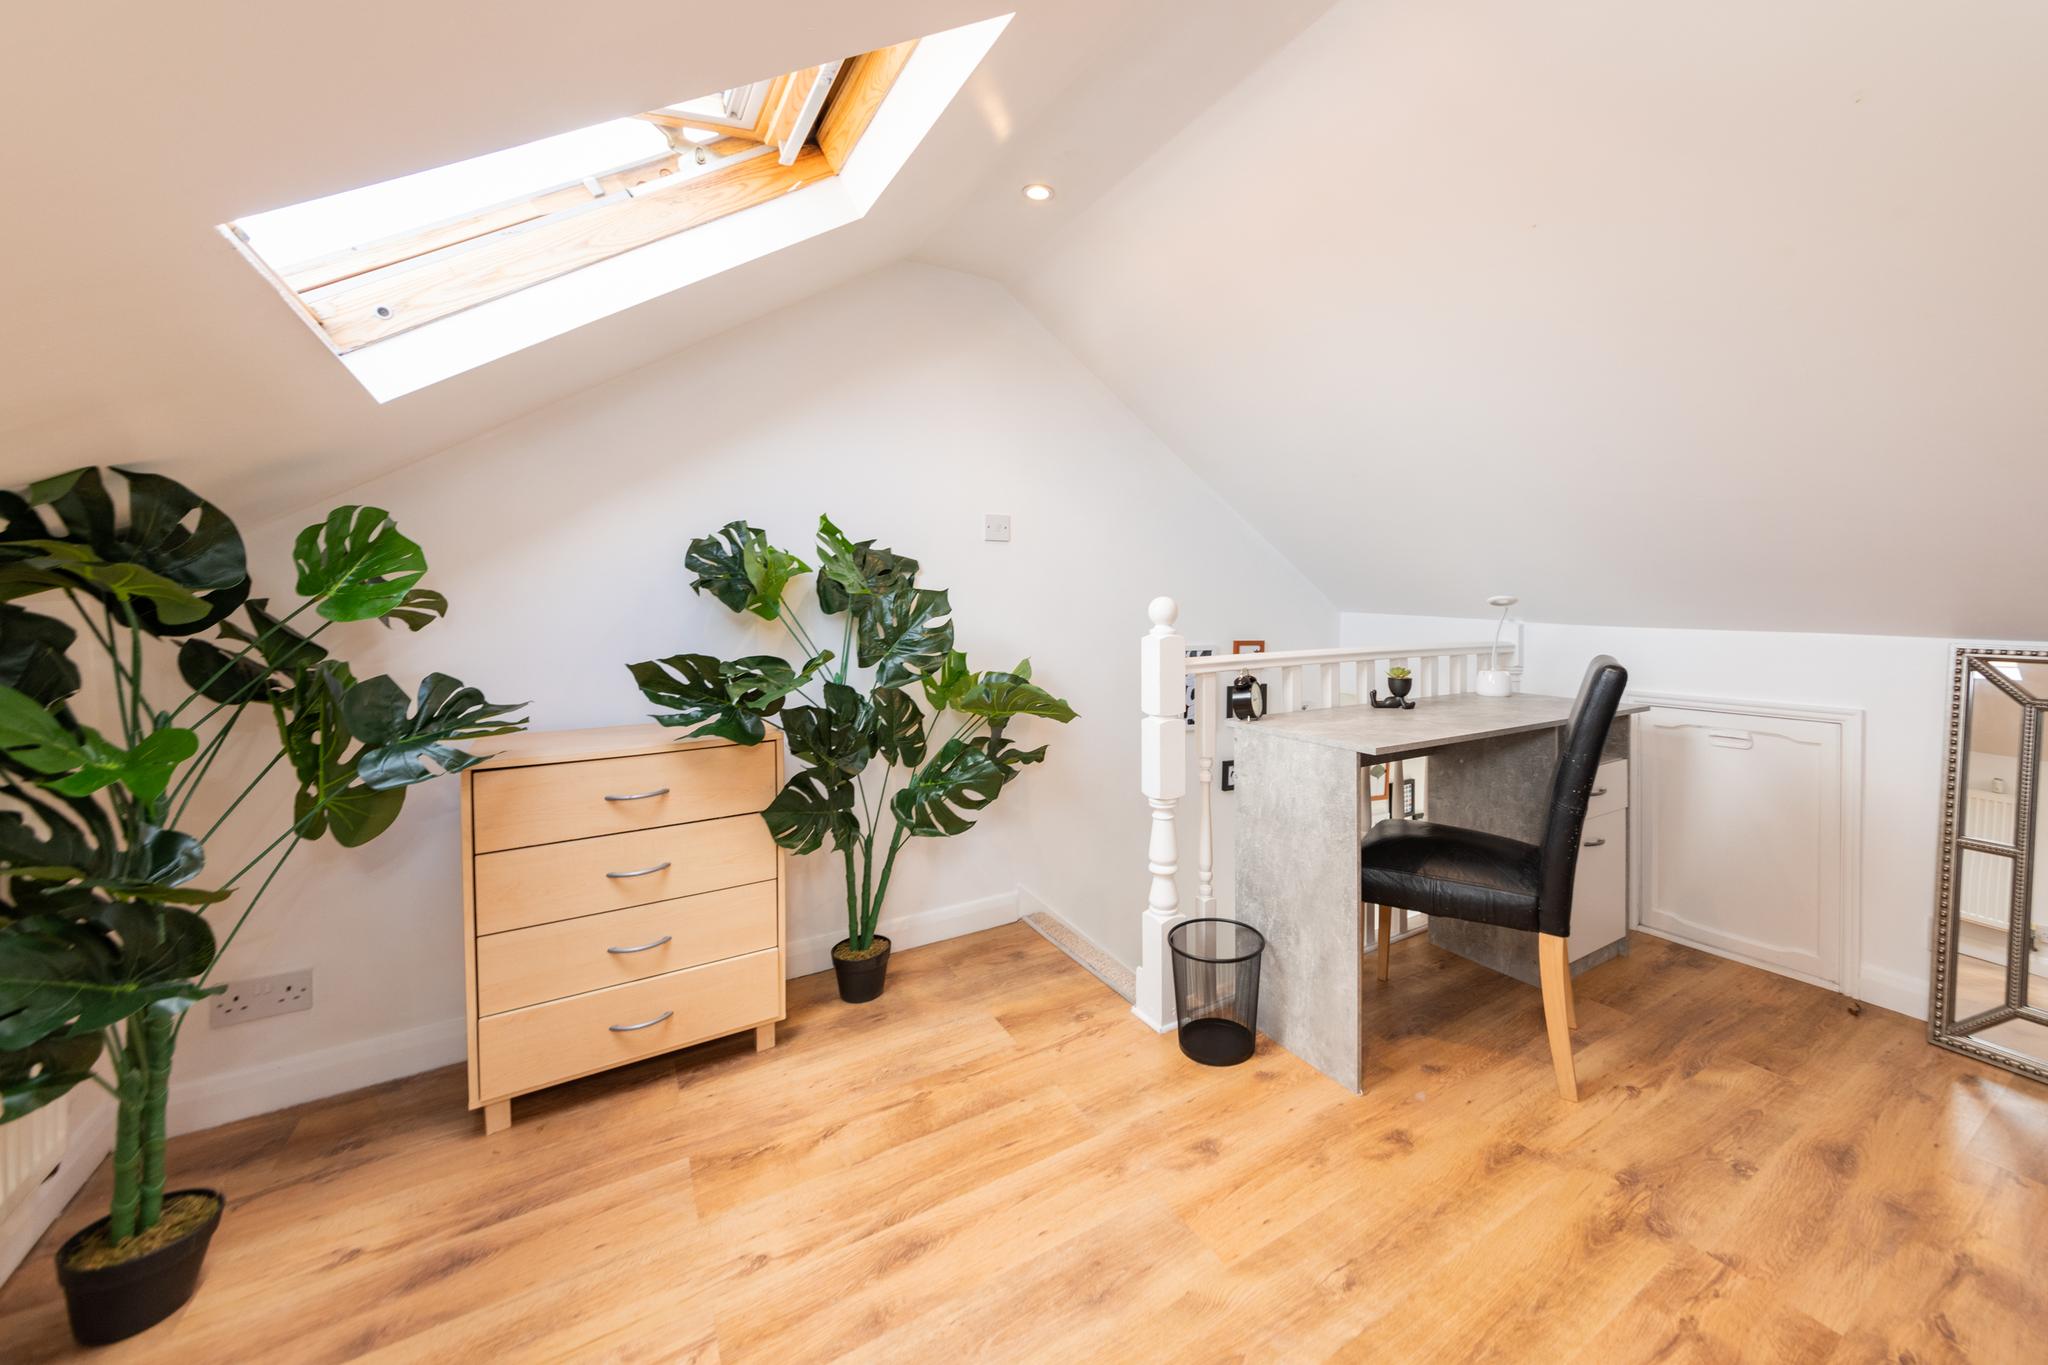 2 Beds| Fully Equipped Flat | Reading Central6